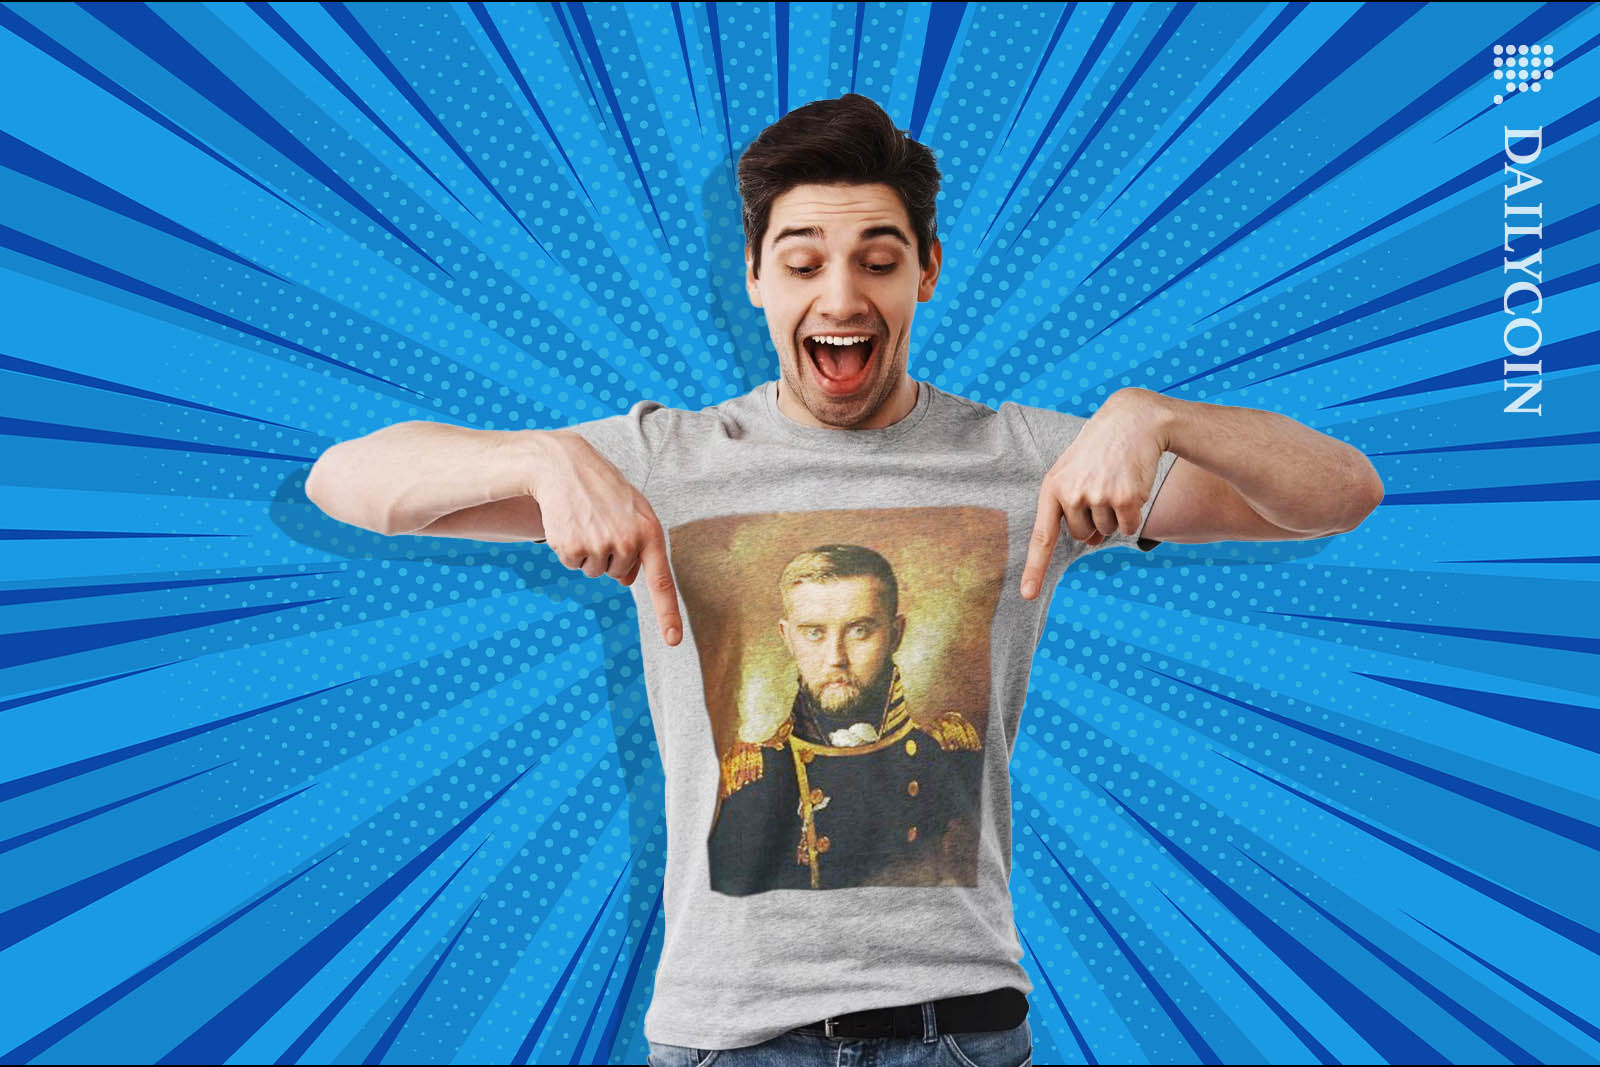 Man wearing a Sergey Nazarov t-shirt and he is very excited about it.